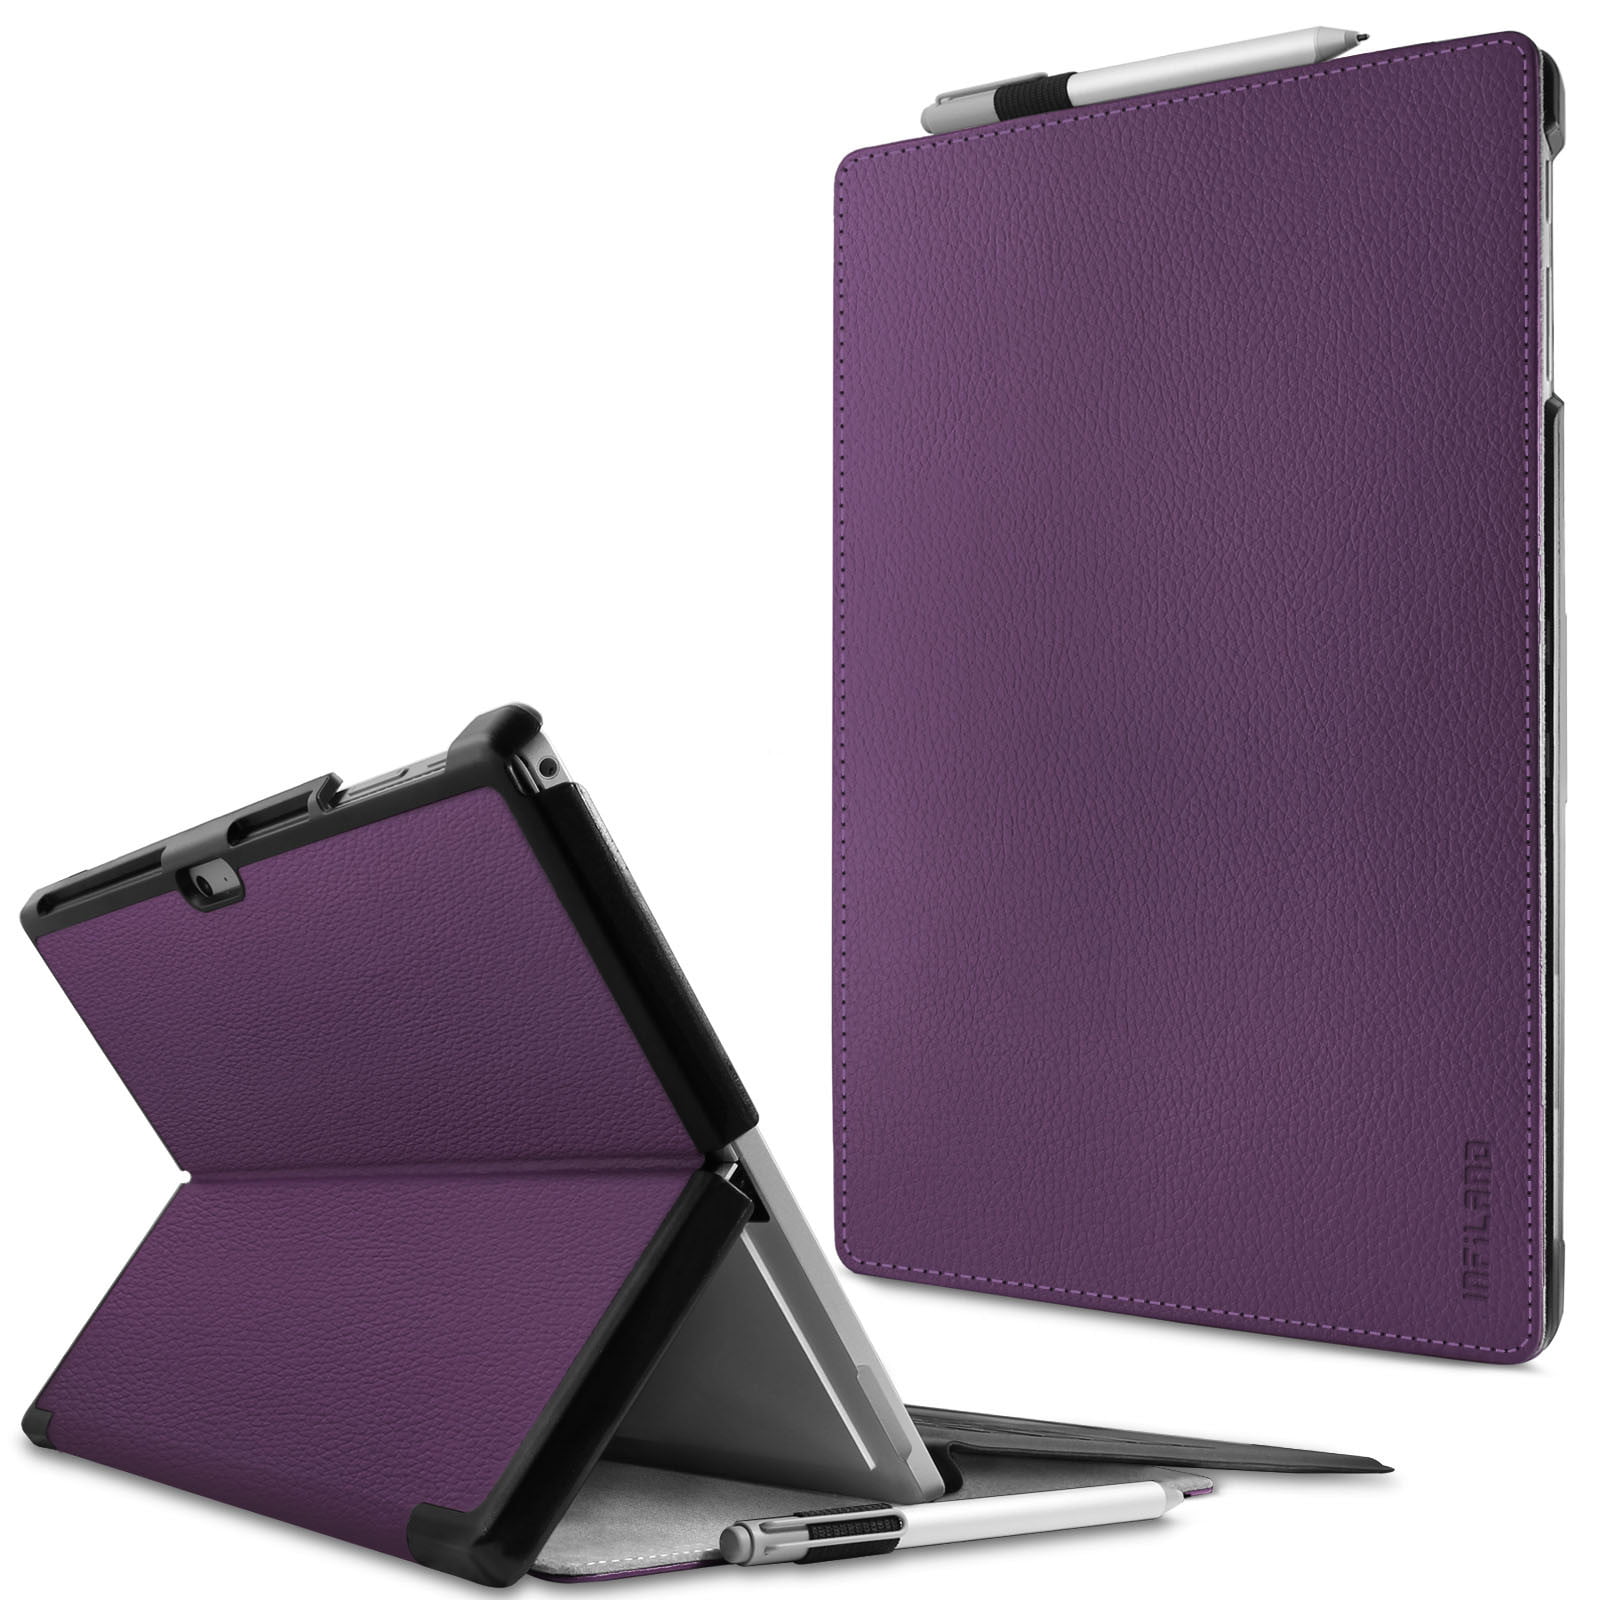 Infiland Microsoft Surface Pro 4 Case Slim Shell Stand Cover For